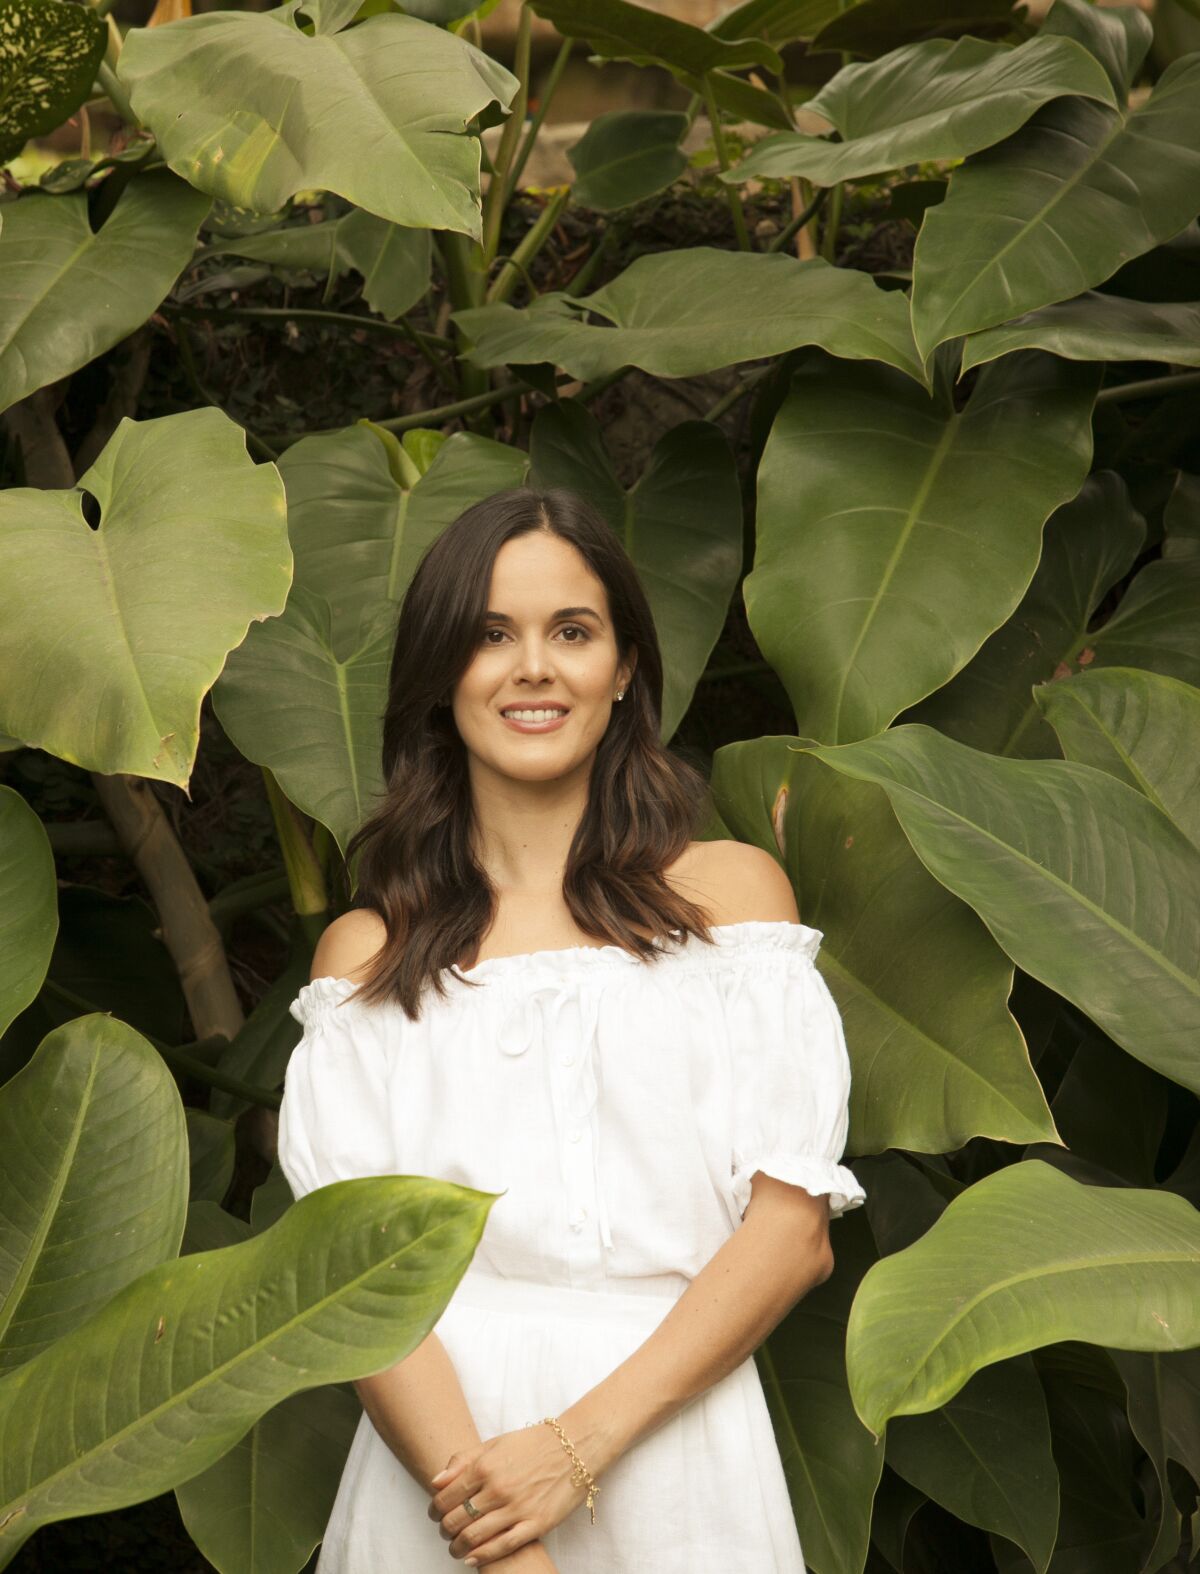 A woman in a white off-the shoulders dress stands surrounded by tropical foliage.